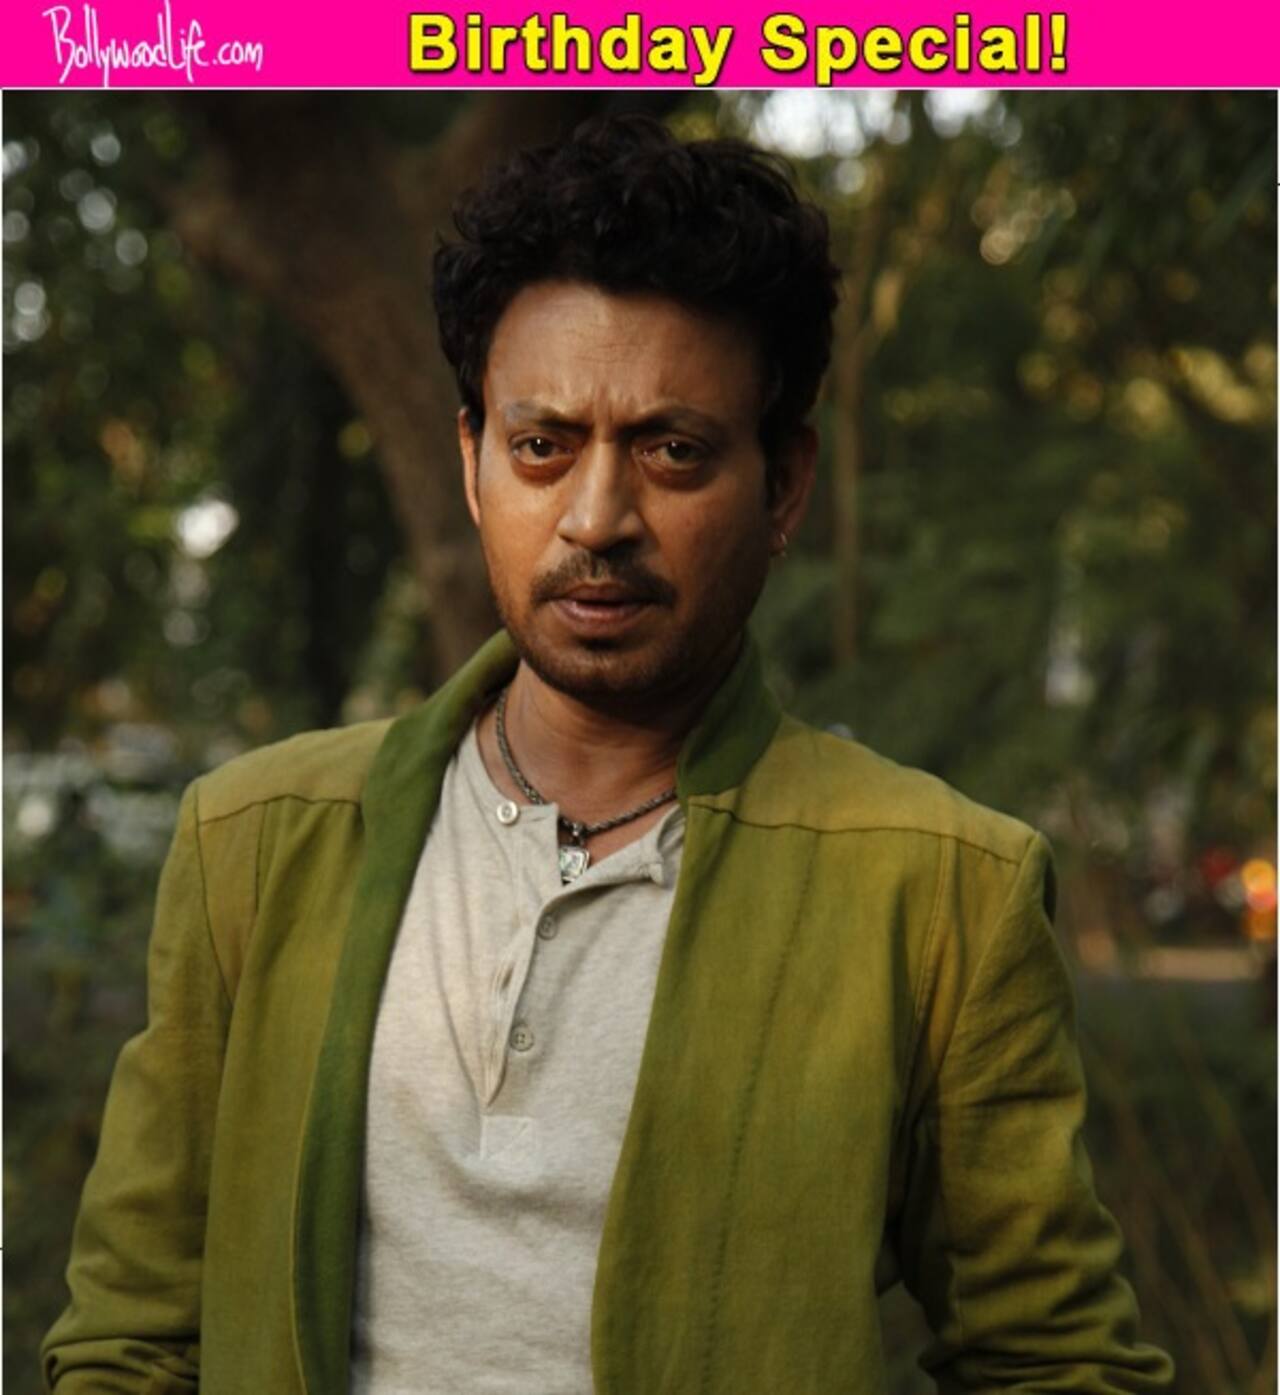 Talvar, The Lunchbox, Maqbool - 7 films that establish why Irrfan Khan is one of the FINEST actors in India!